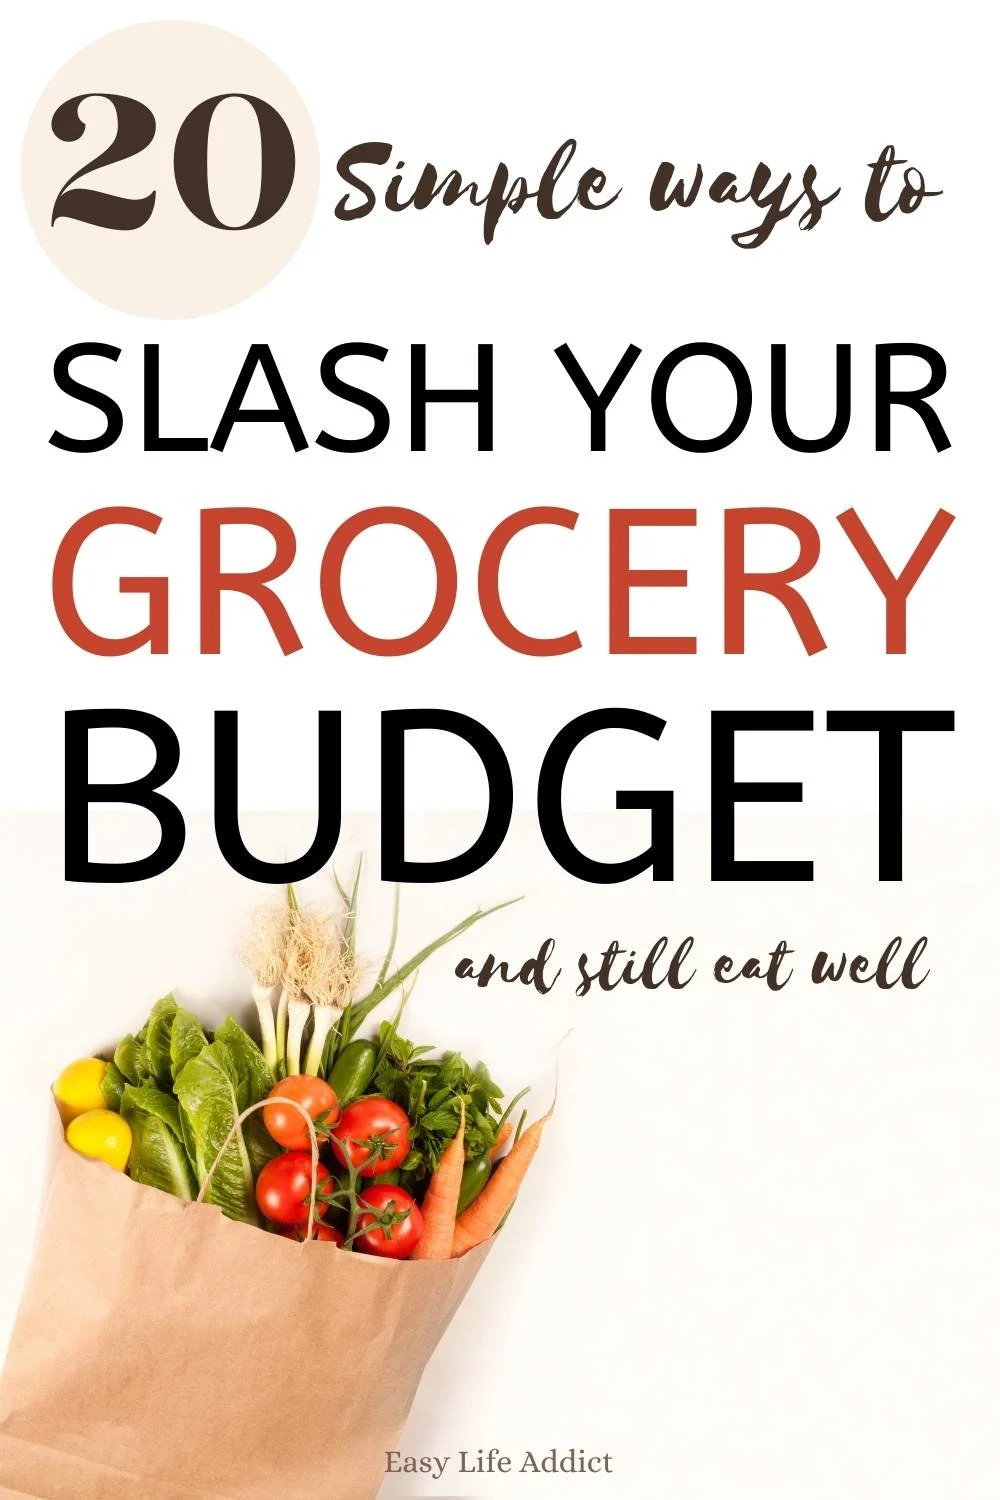 20 Simple ways to slash your grocery budget!